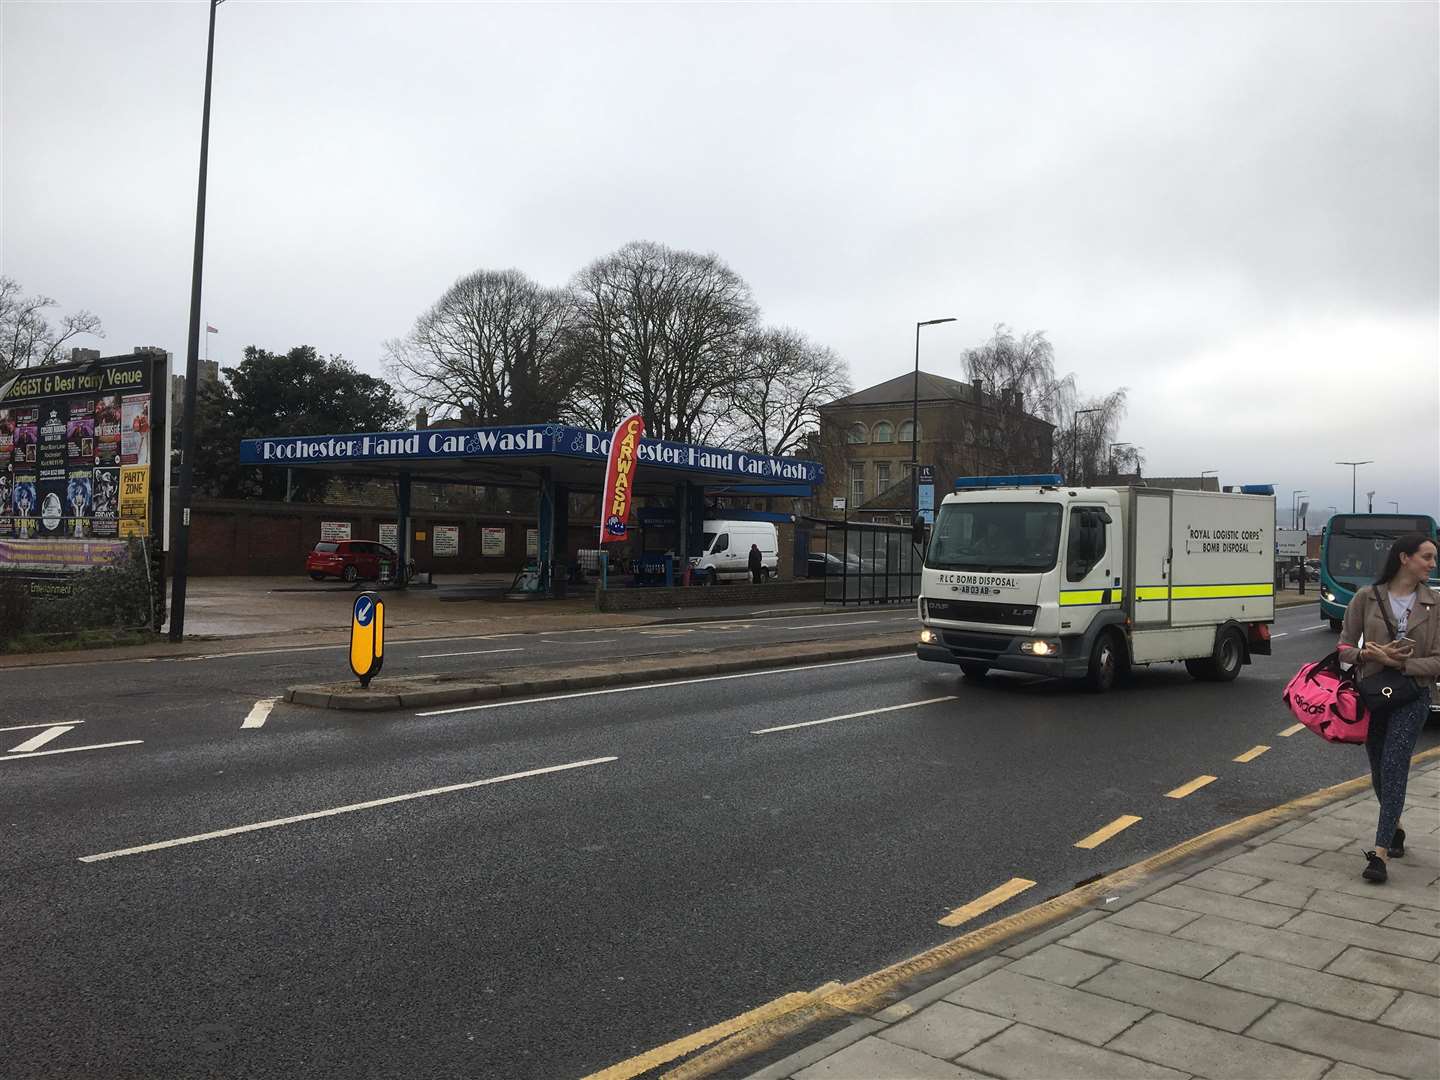 Bomb disposal attended the scene (7012555)